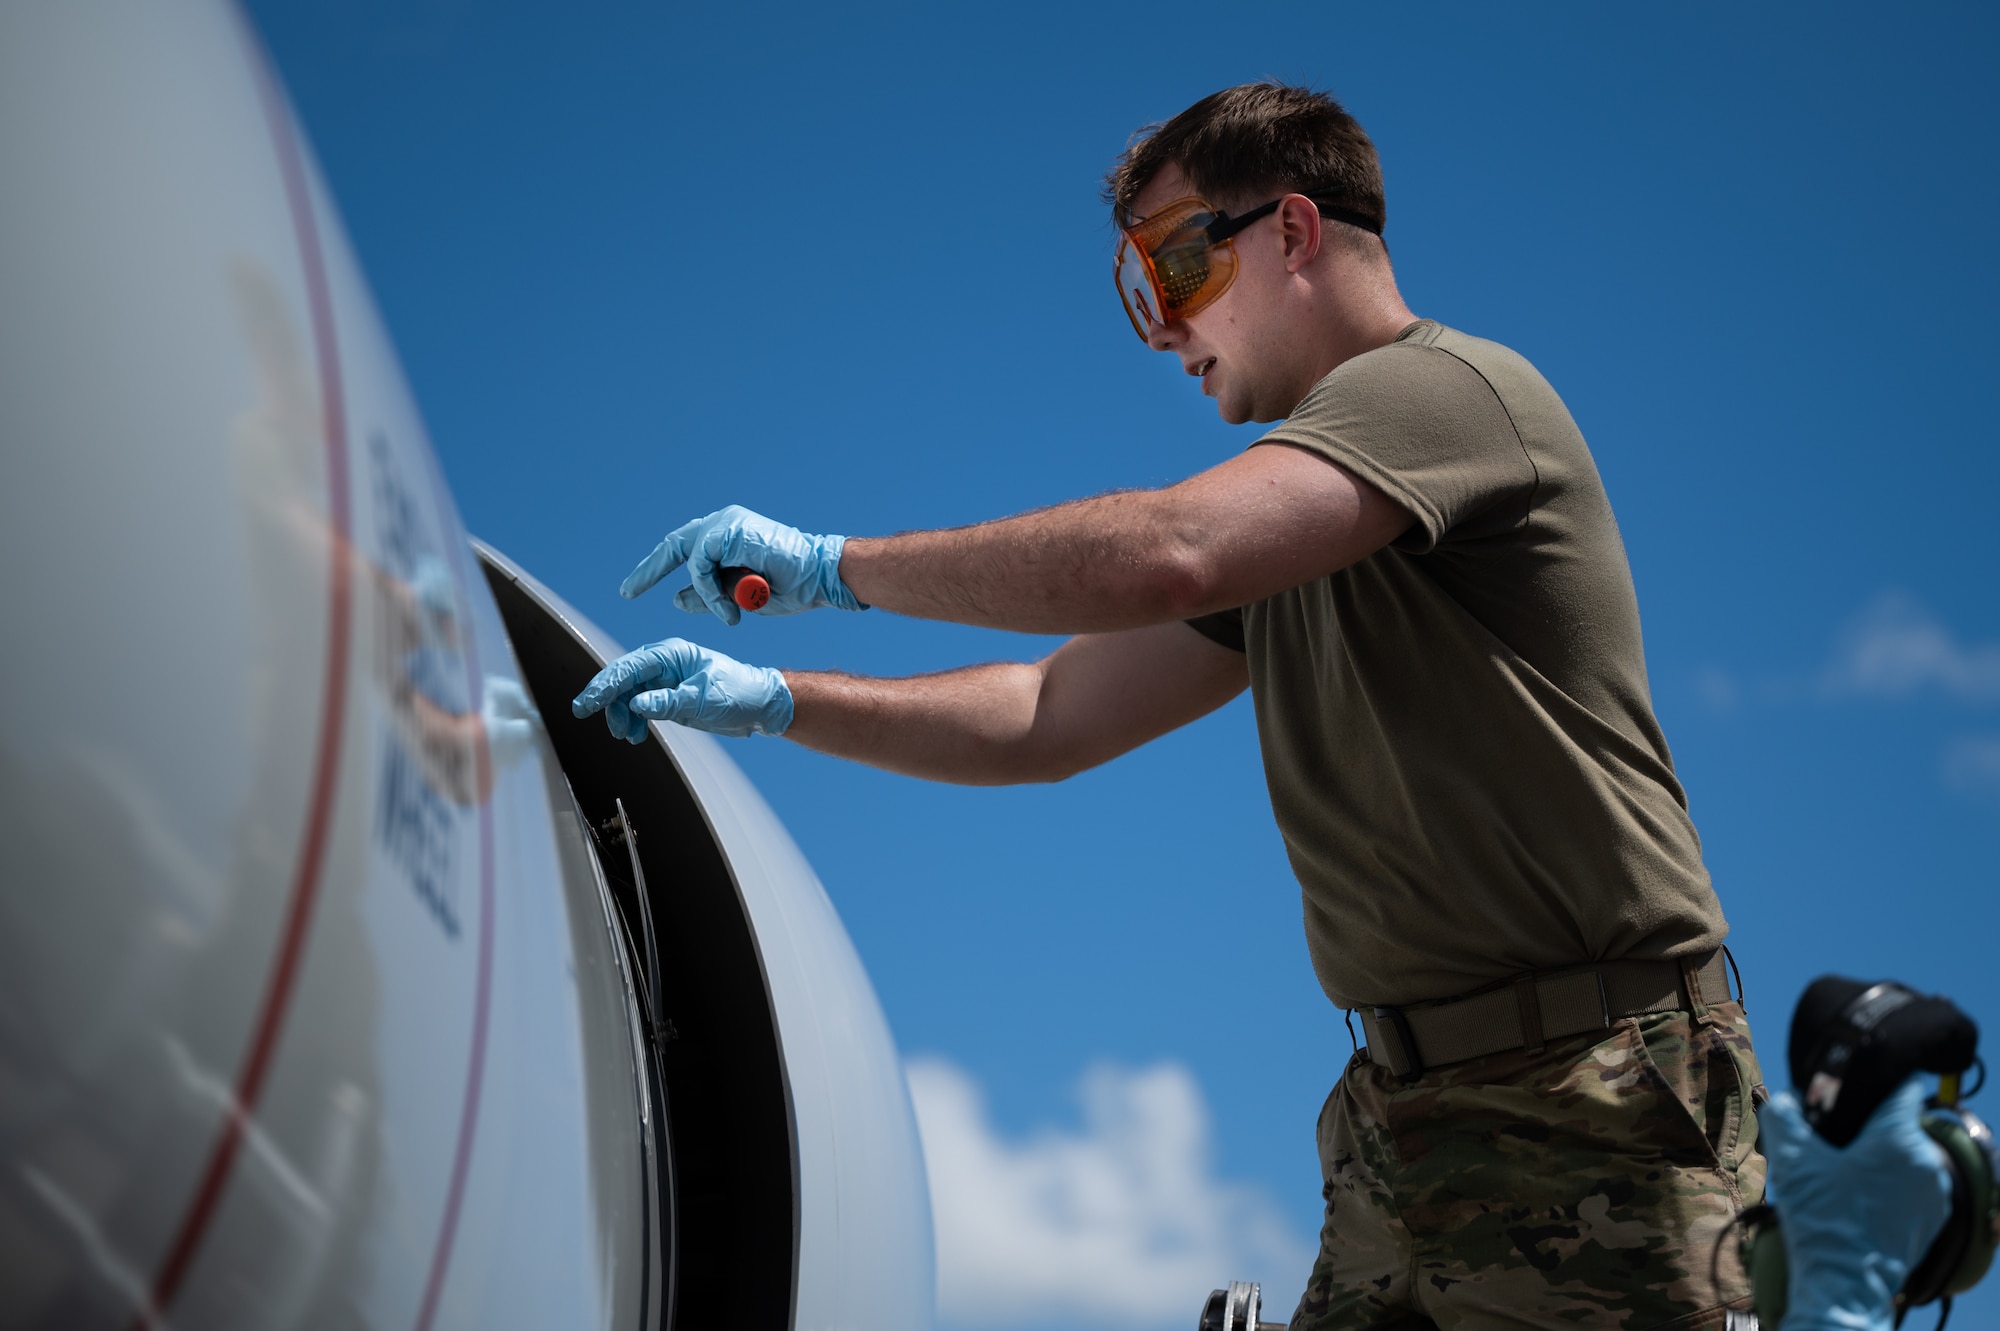 U.S. Air Force Airman 1st Class Andrew Foust, 961st Aircraft Maintenance Unit aerospace propulsion apprentice, inspects an E-3 Sentry engine at Kadena Air Base, Japan, Aug. 30, 2021. E-3 Sentries are capable of command, control and communications operations for tactical and air defense forces. (U.S. Air Force photo by Airman 1st Class Stephen Pulter)